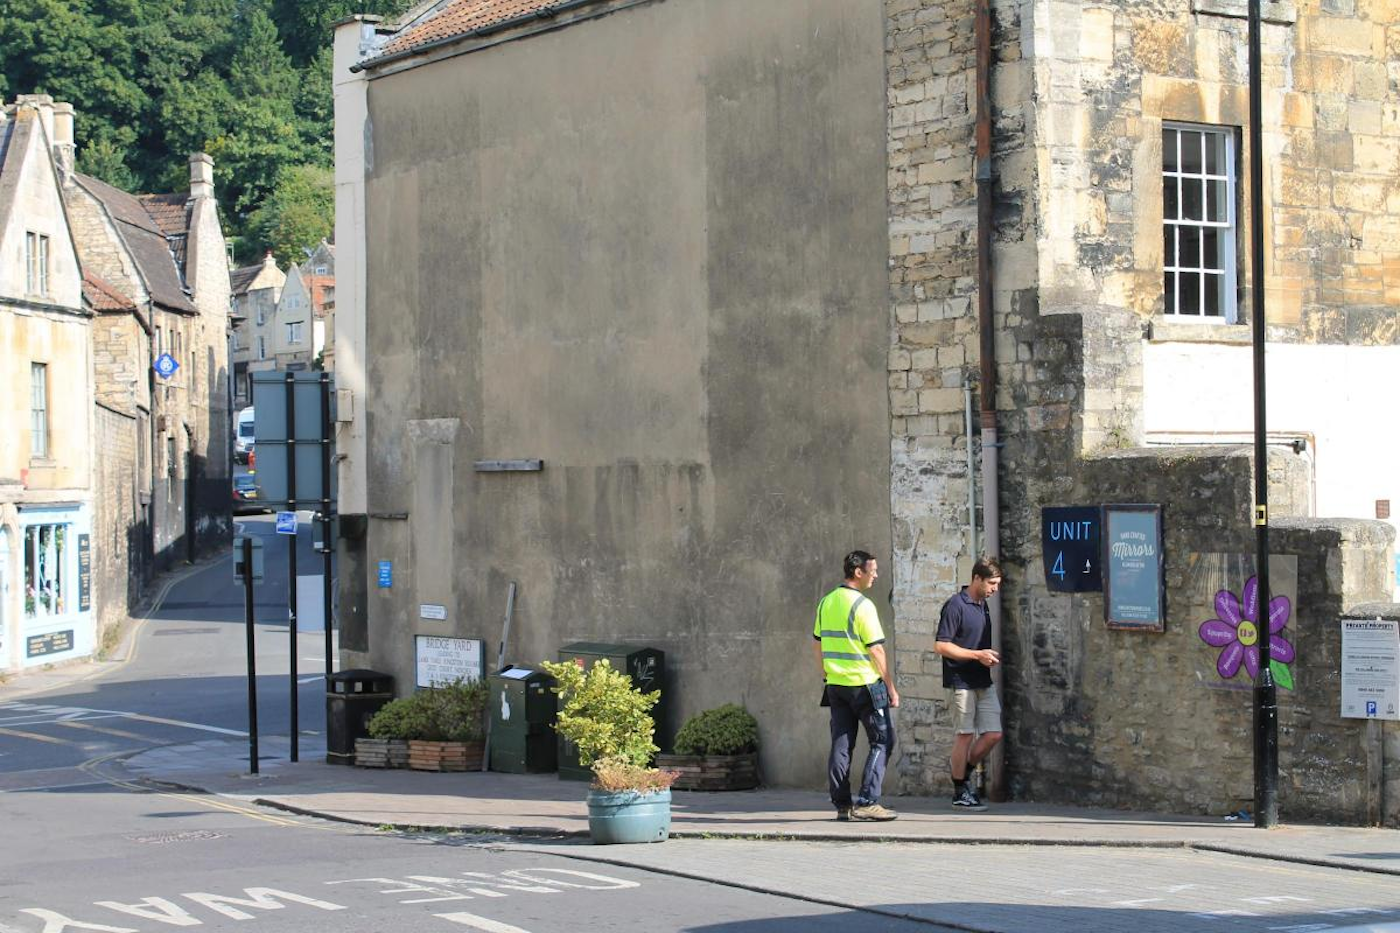 What used to be 'the ugliest wall' in Brad-on-Avon